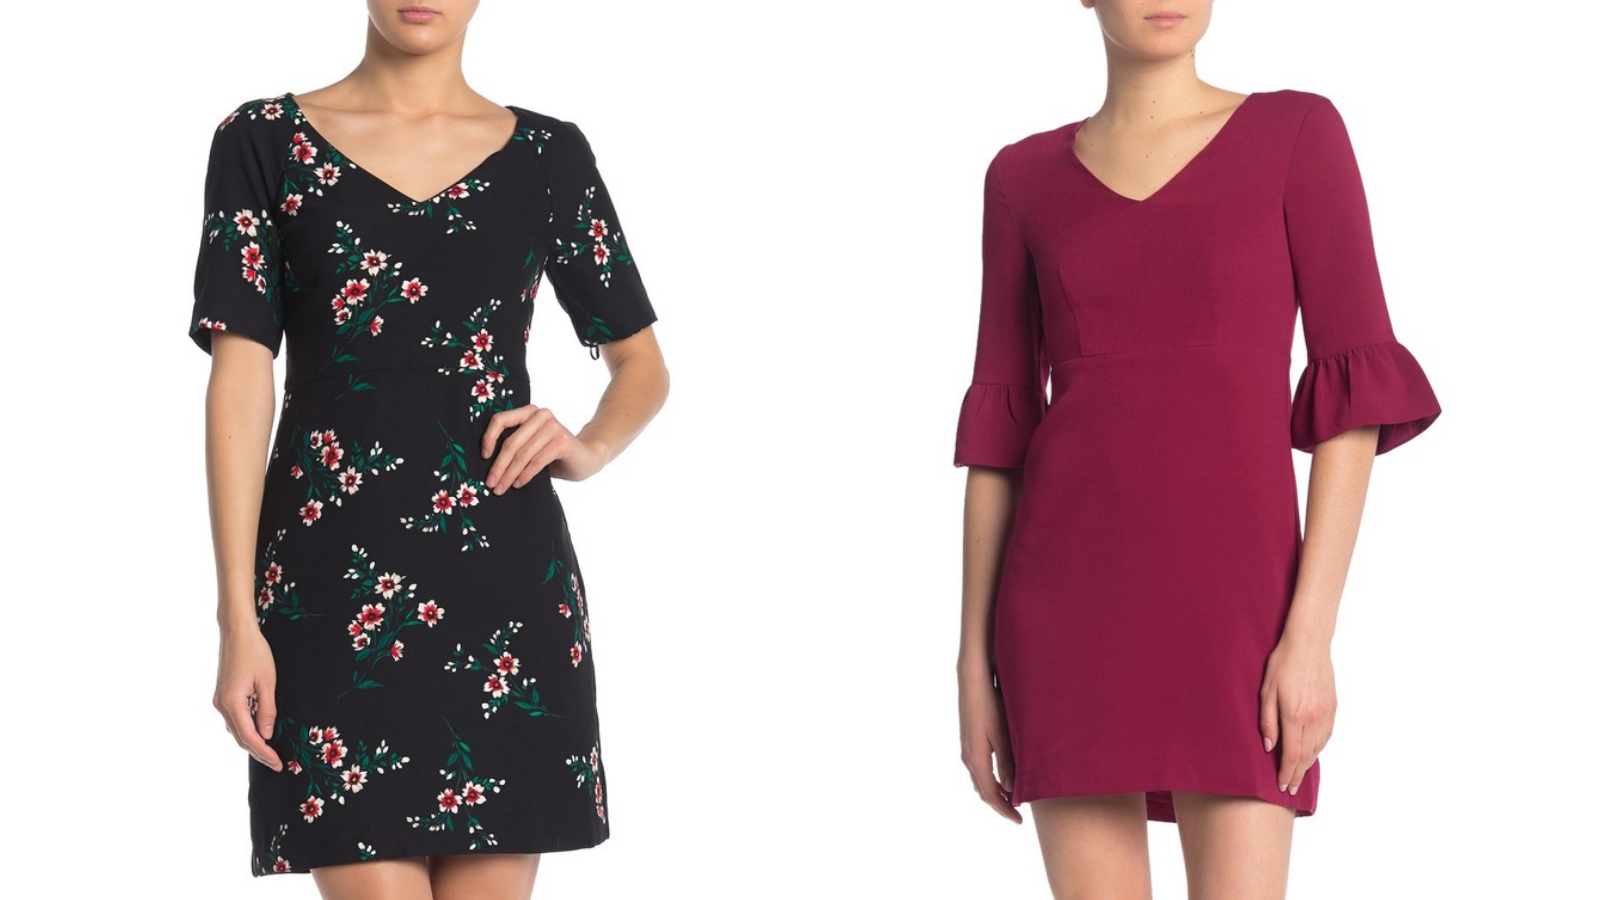 Nordstrom Rack: Get summer dresses for less at the Clear the Rack sale